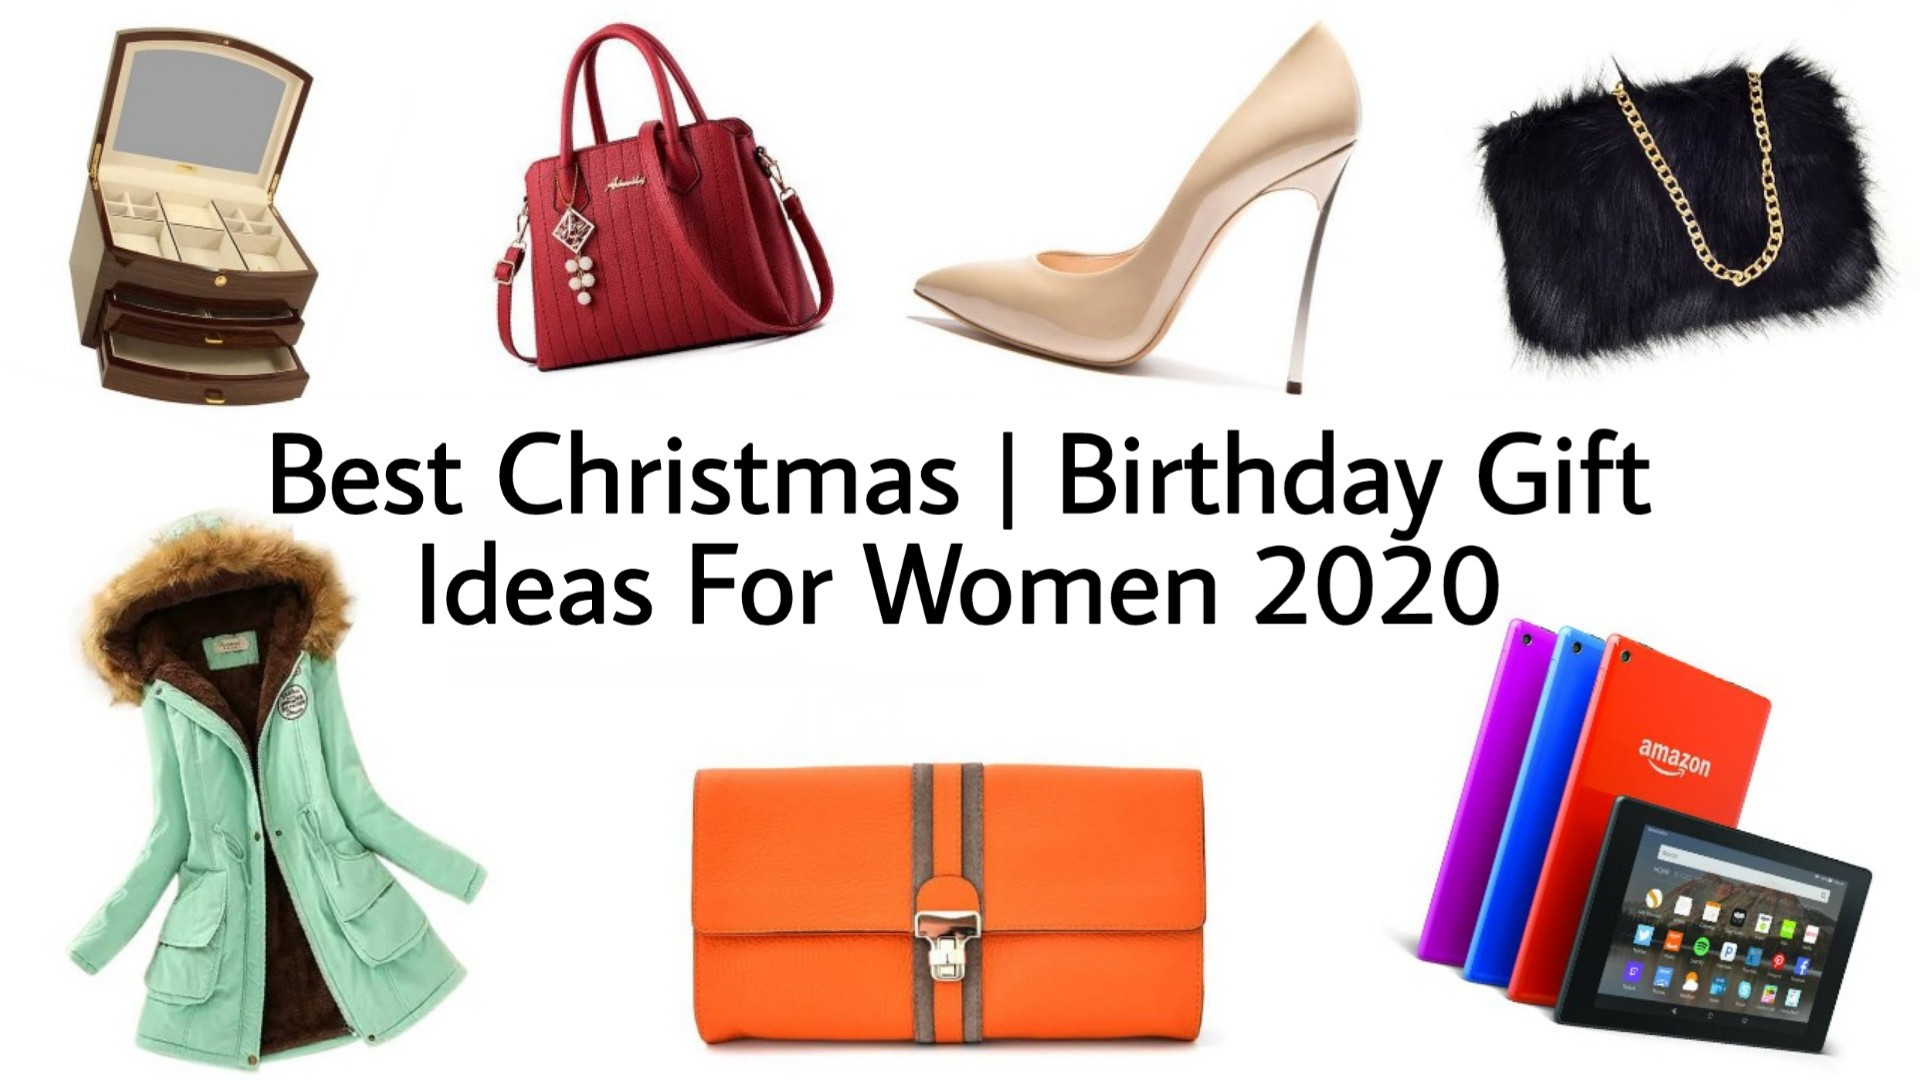 Top Holiday Gift Ideas 2020
 Best Christmas Gifts for Women 2020